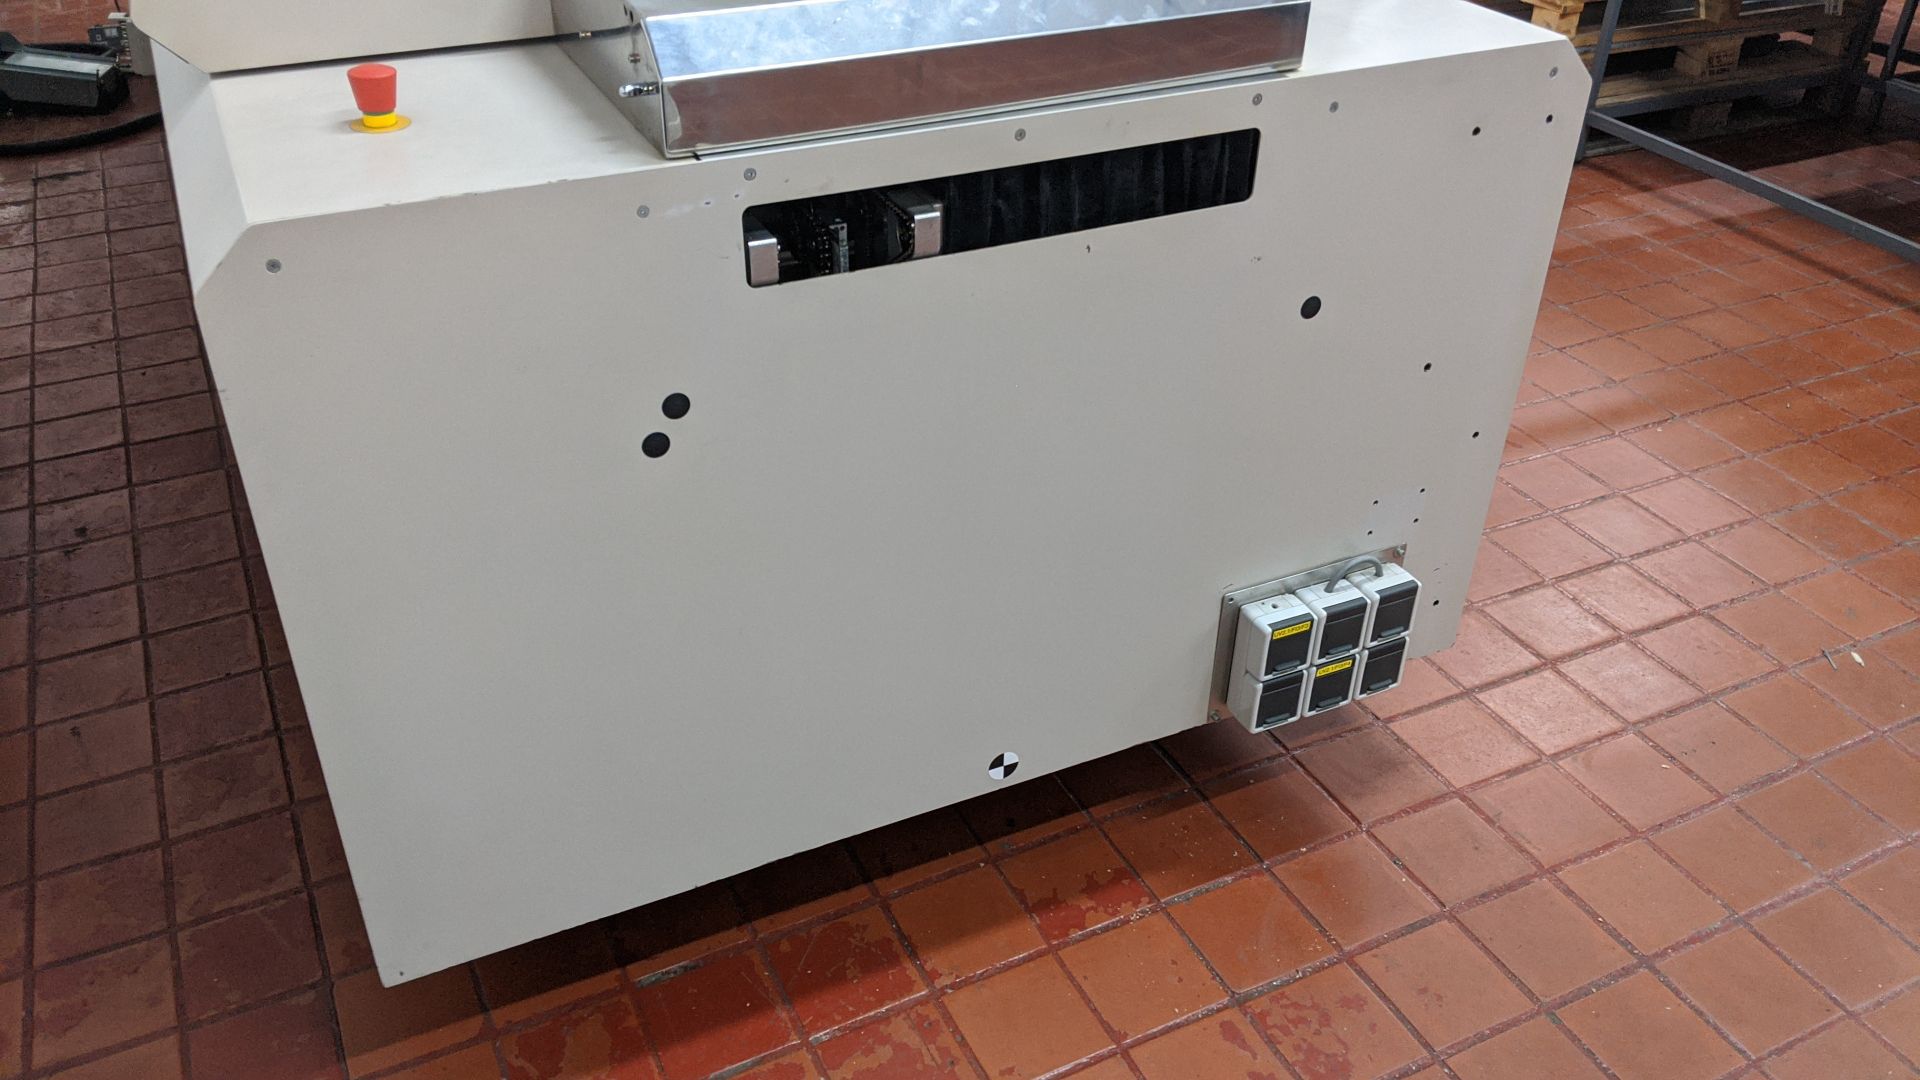 2010 SMT QUATTRO PEAK M N2 REFLOW OVEN for use in Printed Circuit Board Assembly - Image 10 of 21